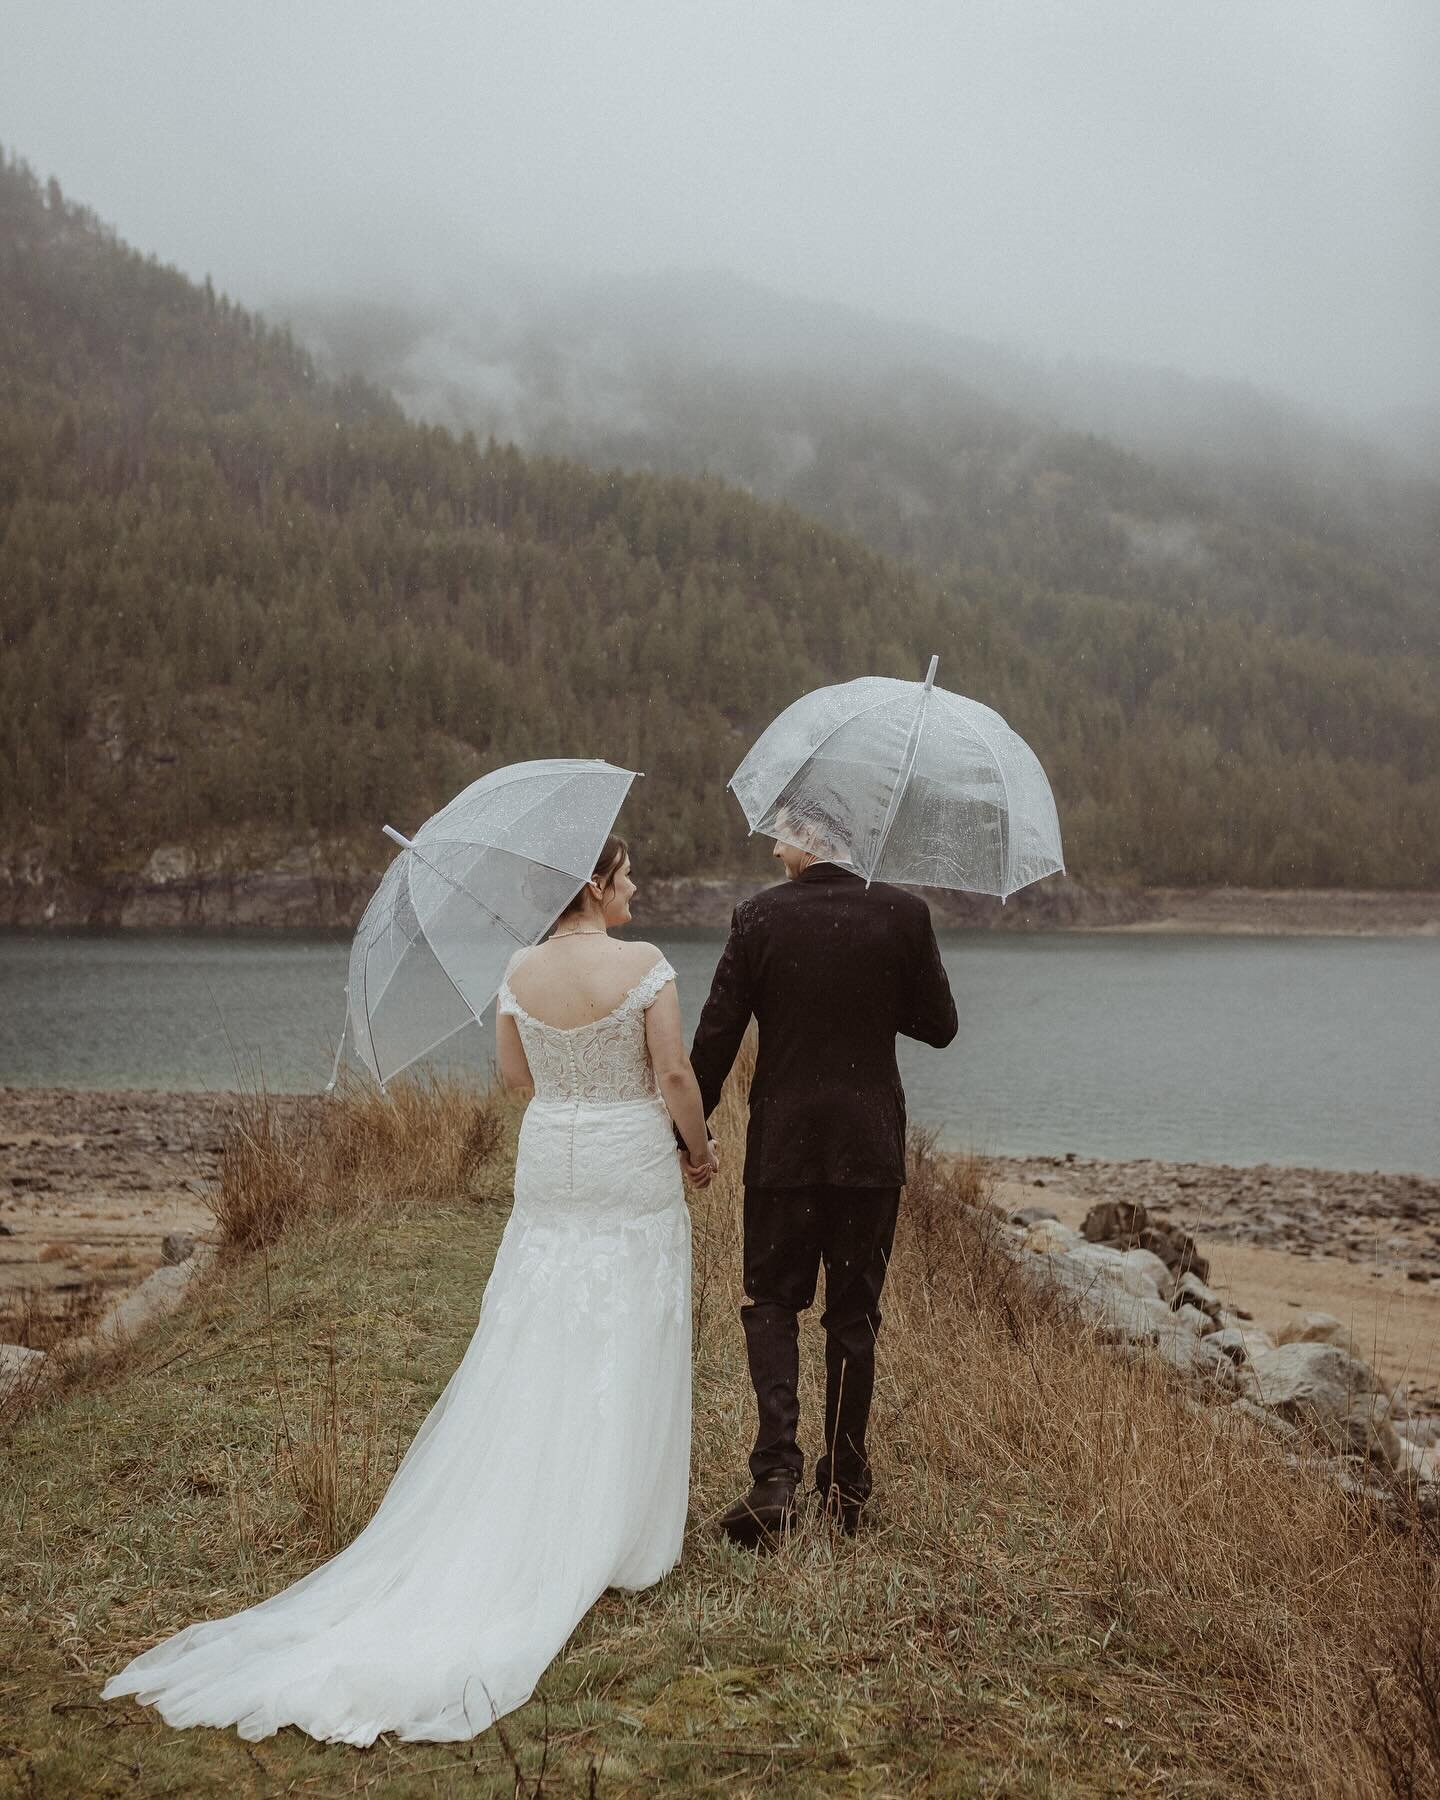 They met in the rain and got married in the rain. I&rsquo;d say yesterday&rsquo;s weather was kinda perfect, despite getting a tad bit wet! Besides, it&rsquo;s good luck to have rain on your wedding day! 🍀☔️💍 

Congratulations J&amp;J! I&rsquo;m so